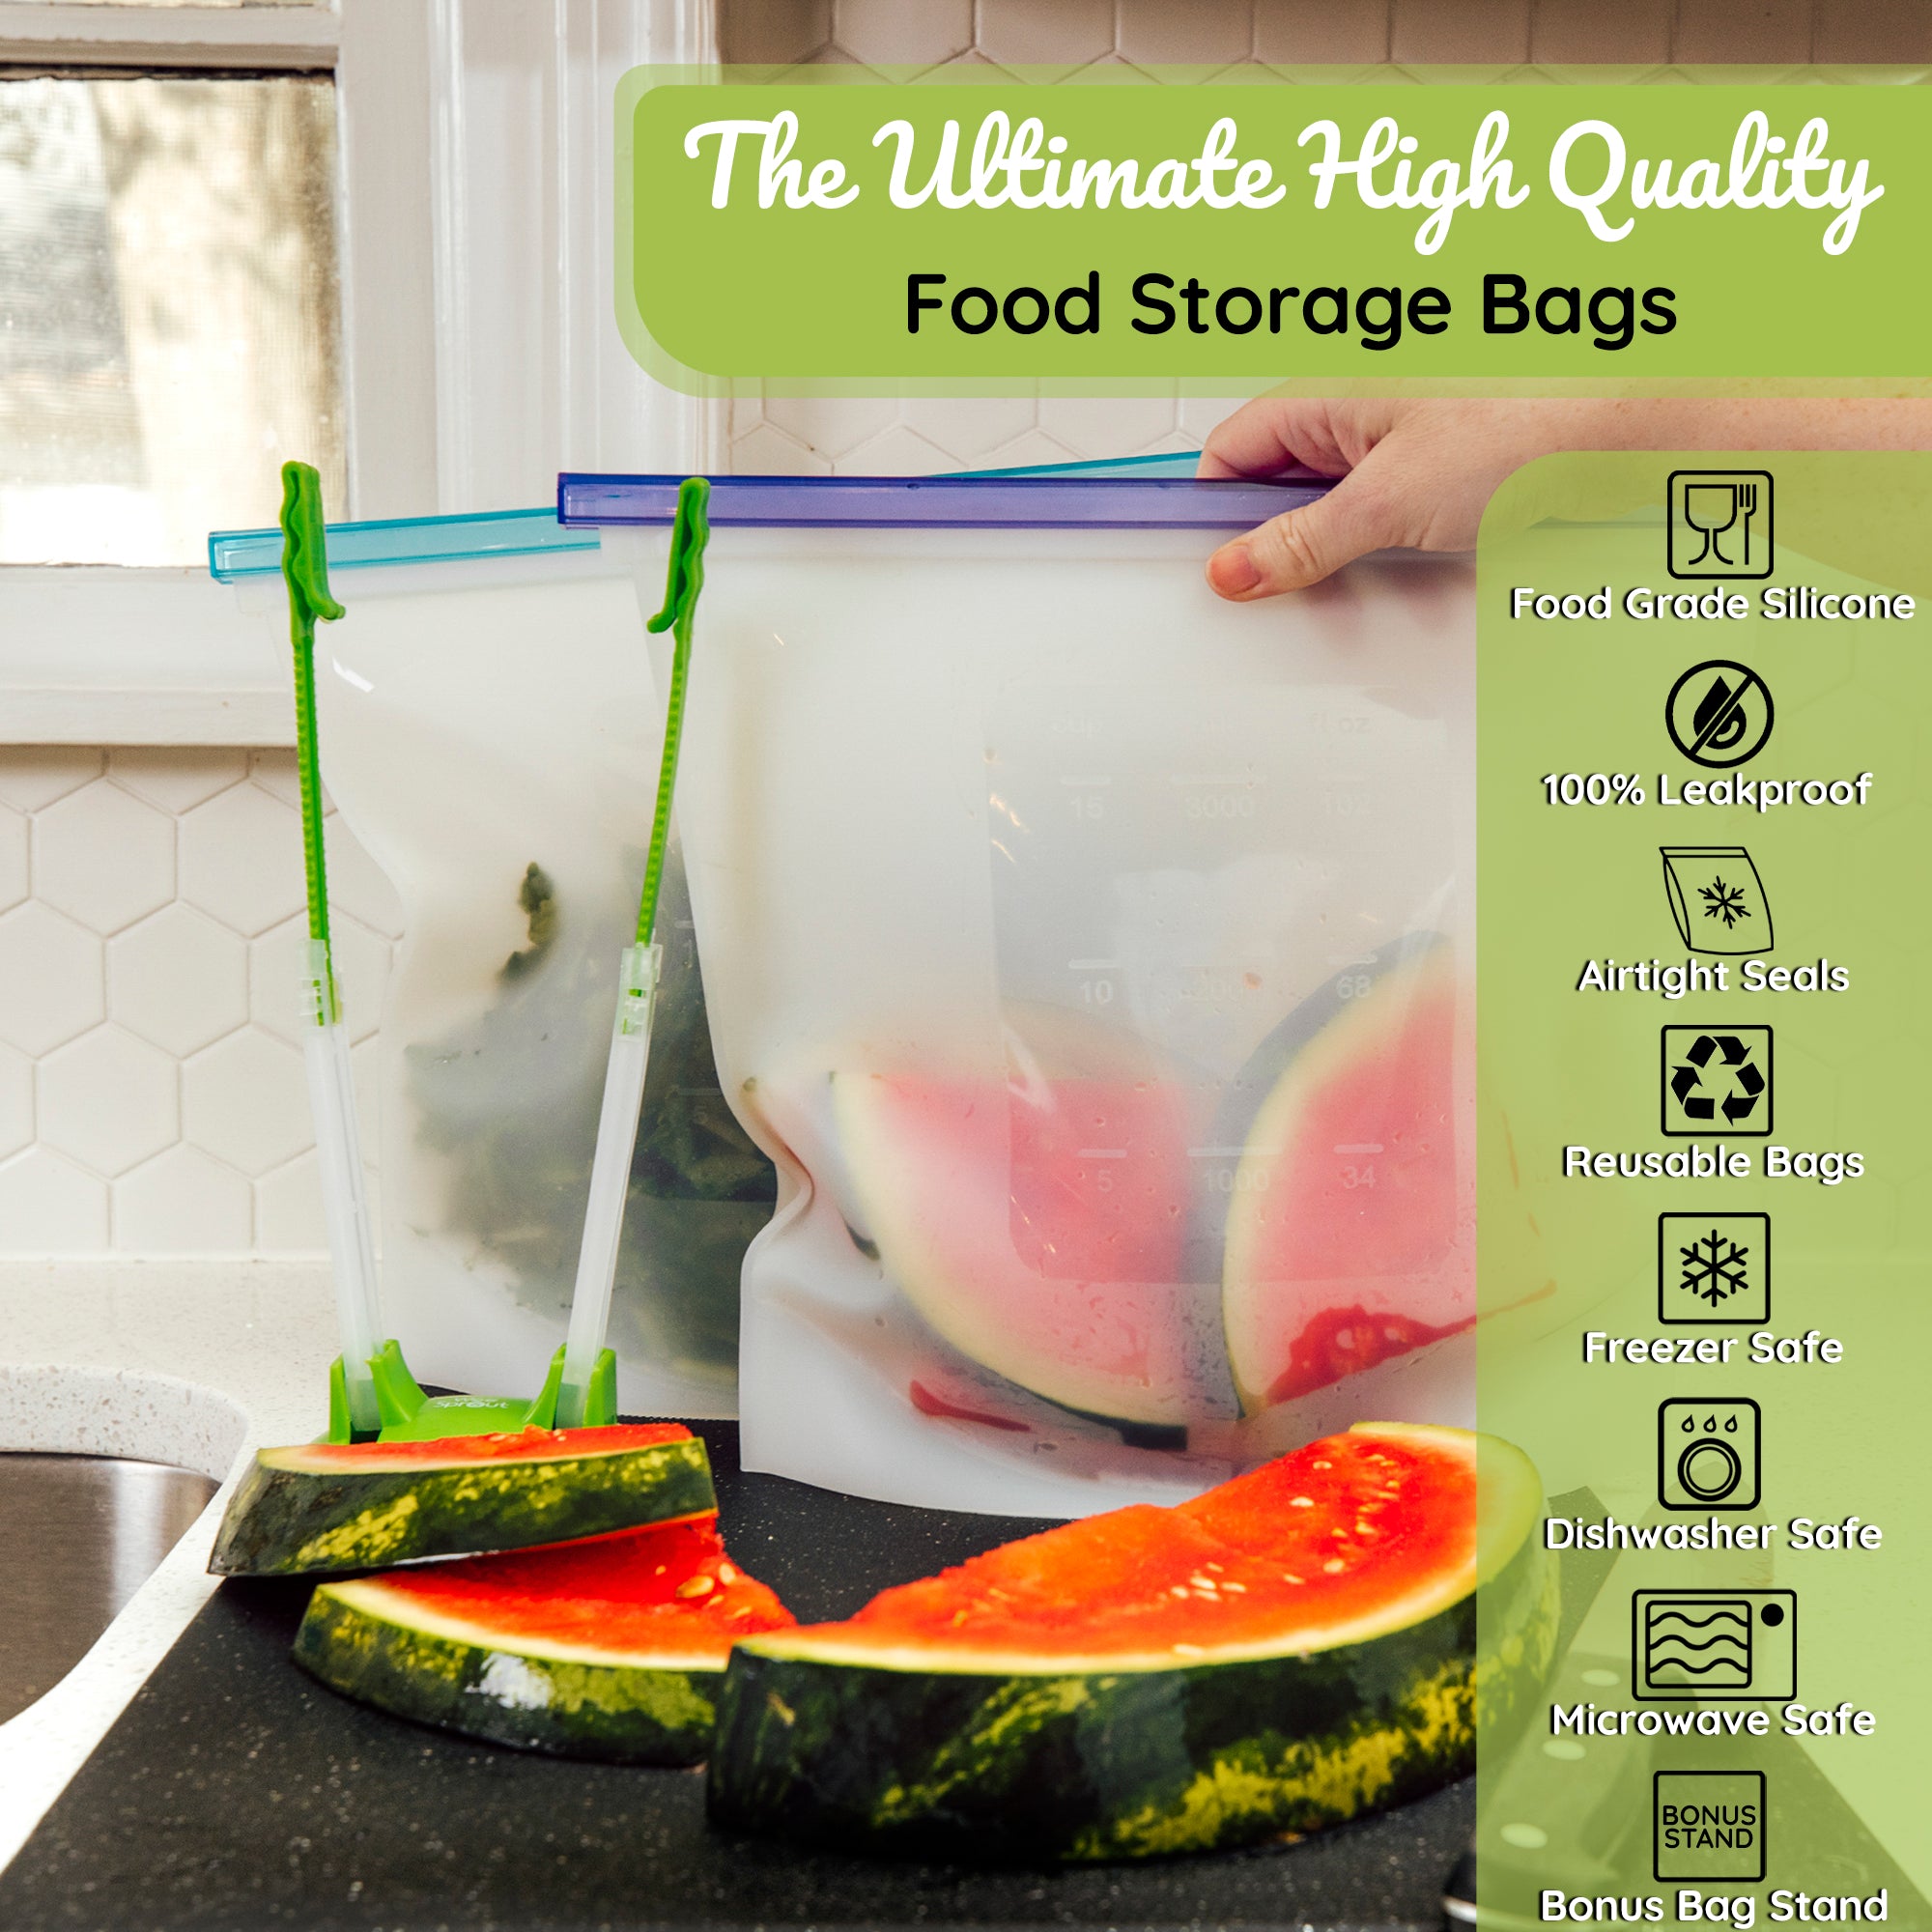 WeeSprout 100% Silicone Reusable Food Storage Bags - Set of 7 Leakproof &  Airtight Bags (Four 4 Cup Bags and Three 6 Cup Bags), Freezer, Microwave, 